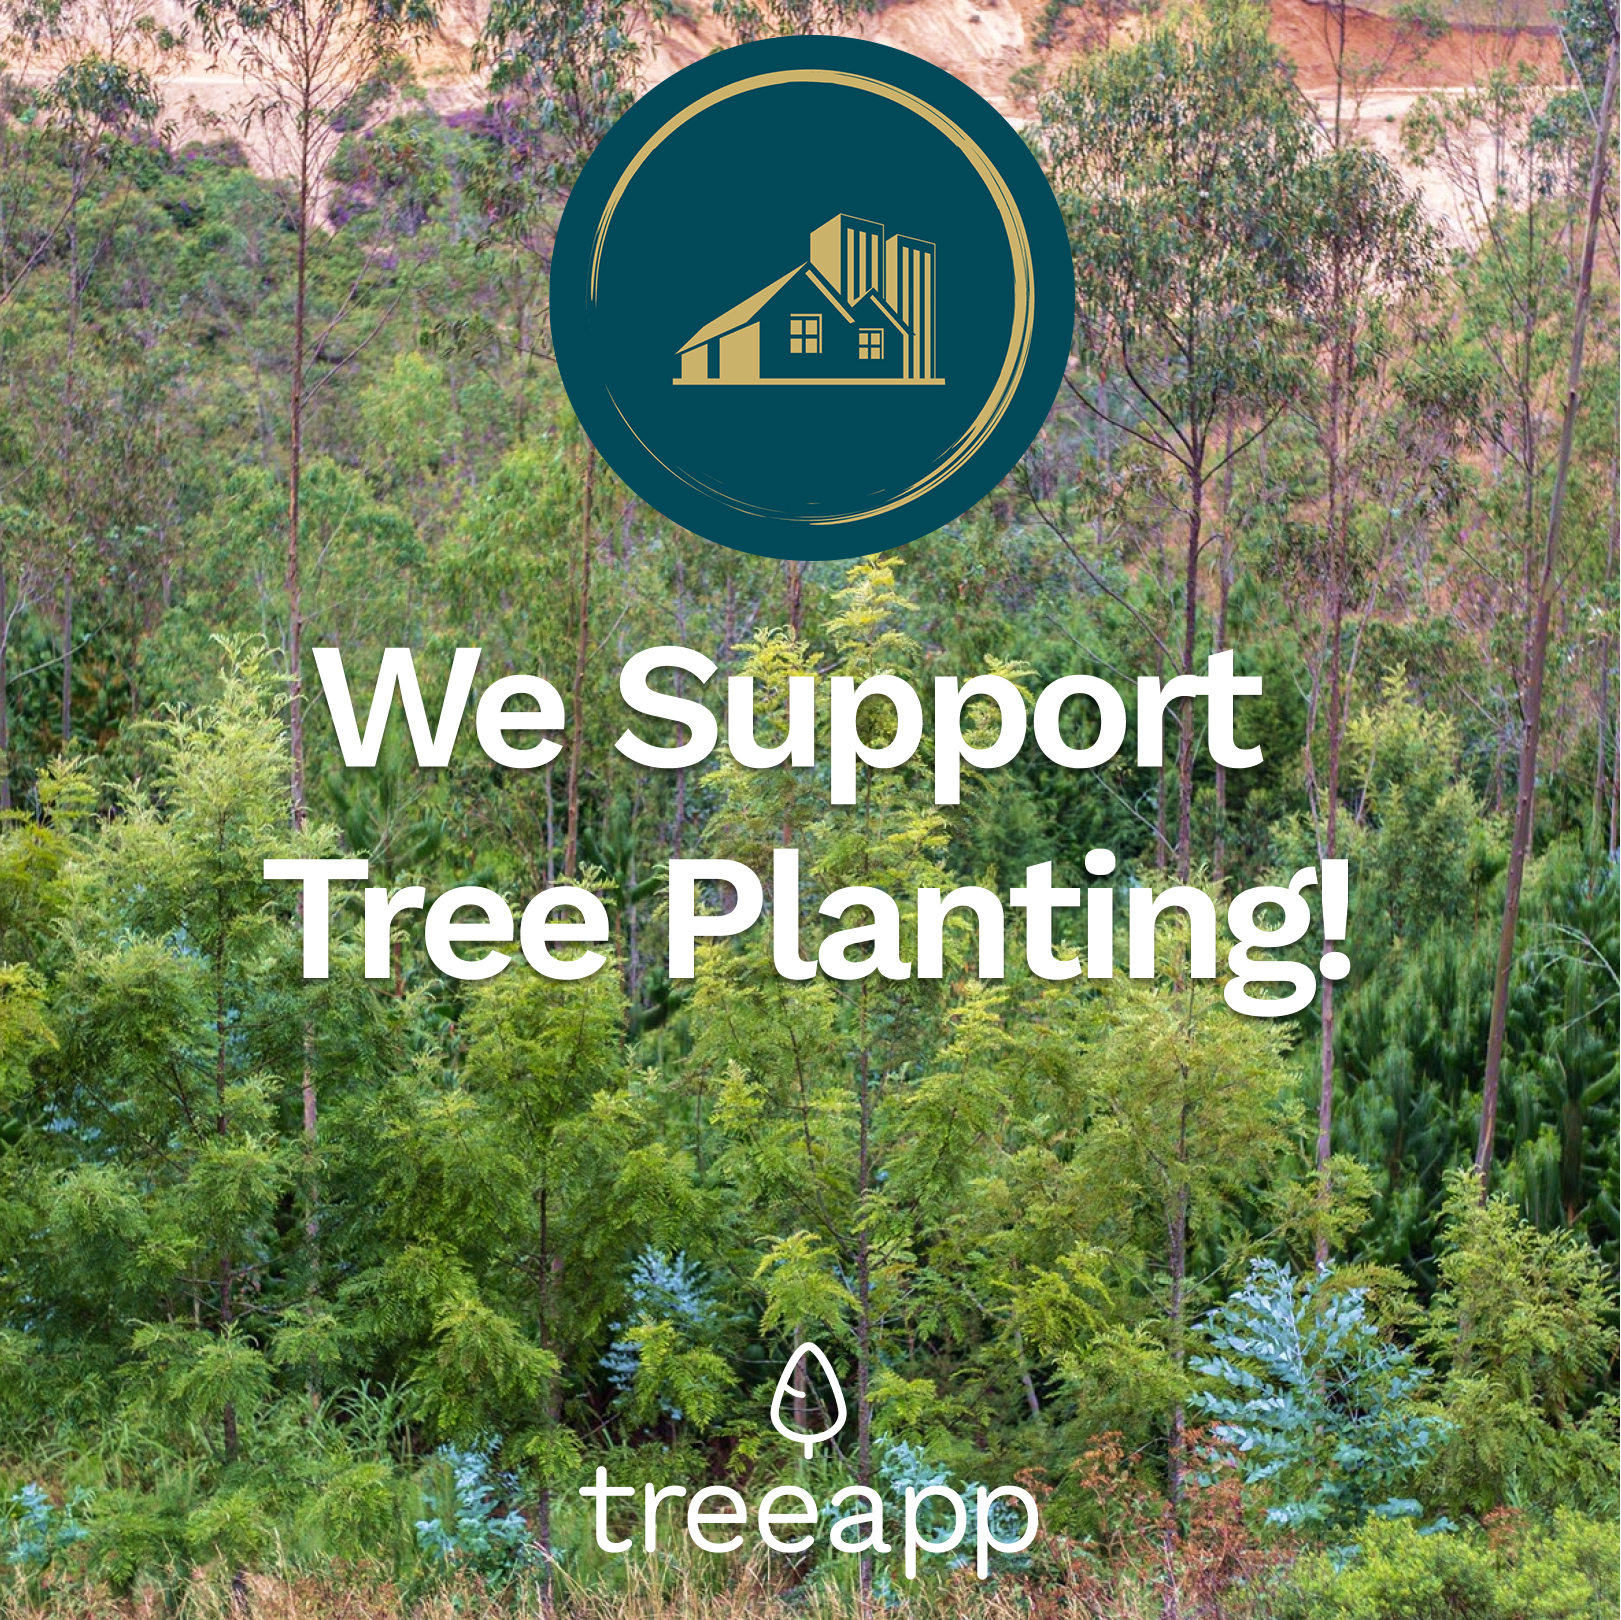 We support tree planting with Treeapp